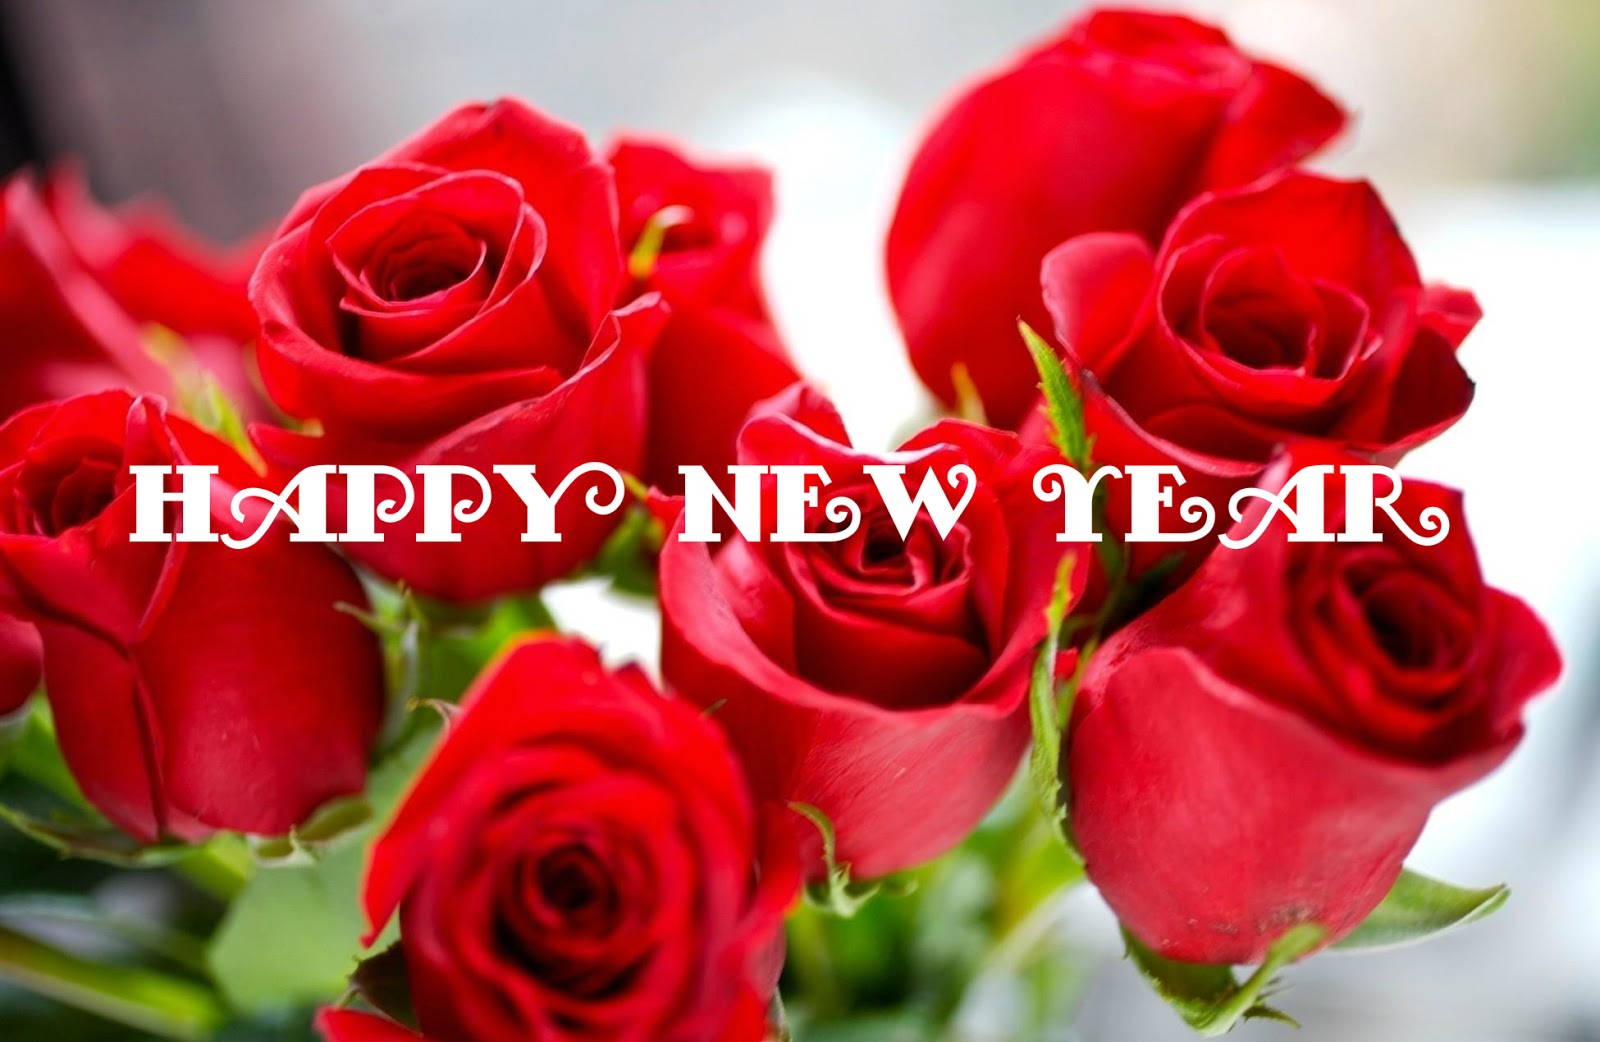 [51+] Happy New Year With Flowers Wallpapers WallpaperSafari